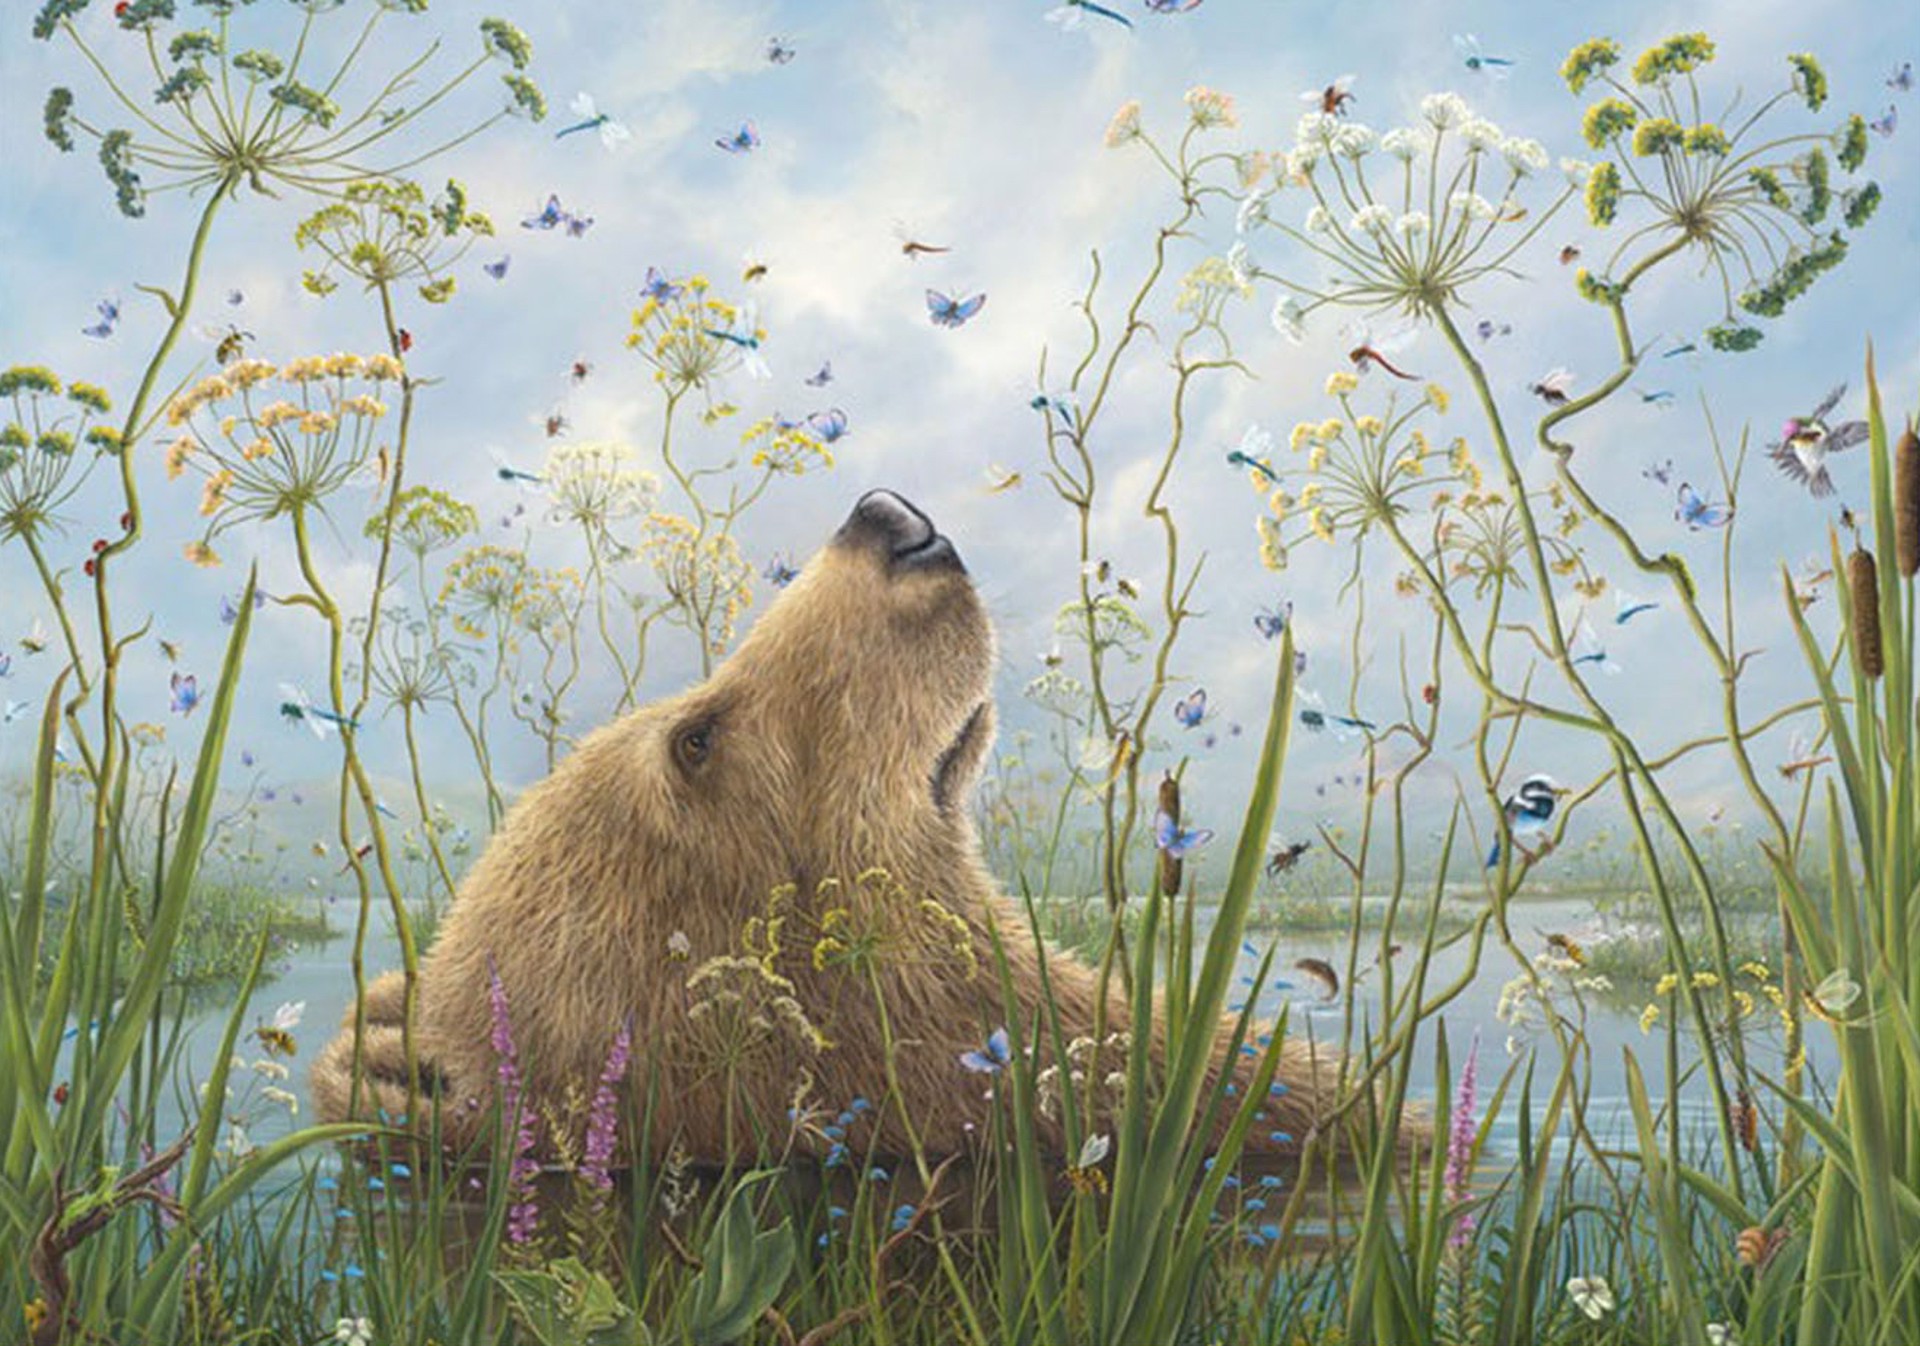 The Whole World - SOLD OUT ON ALL EDITIONS by Robert Bissell